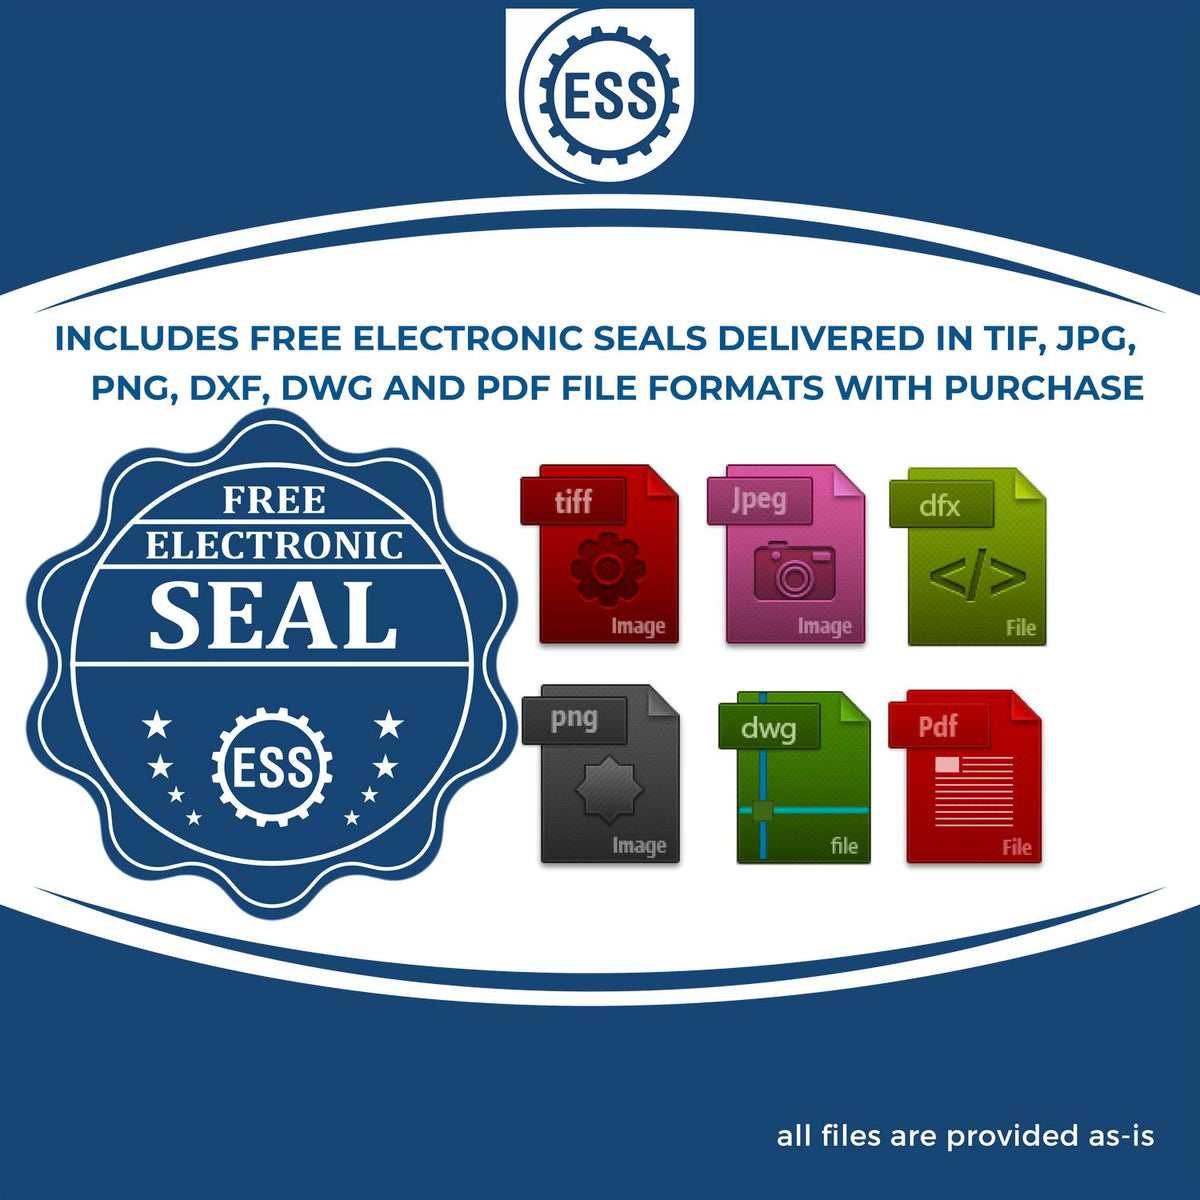 An infographic for the free electronic seal for the Gift Hawaii Geologist Seal illustrating the different file type icons such as DXF, DWG, TIF, JPG and PNG.